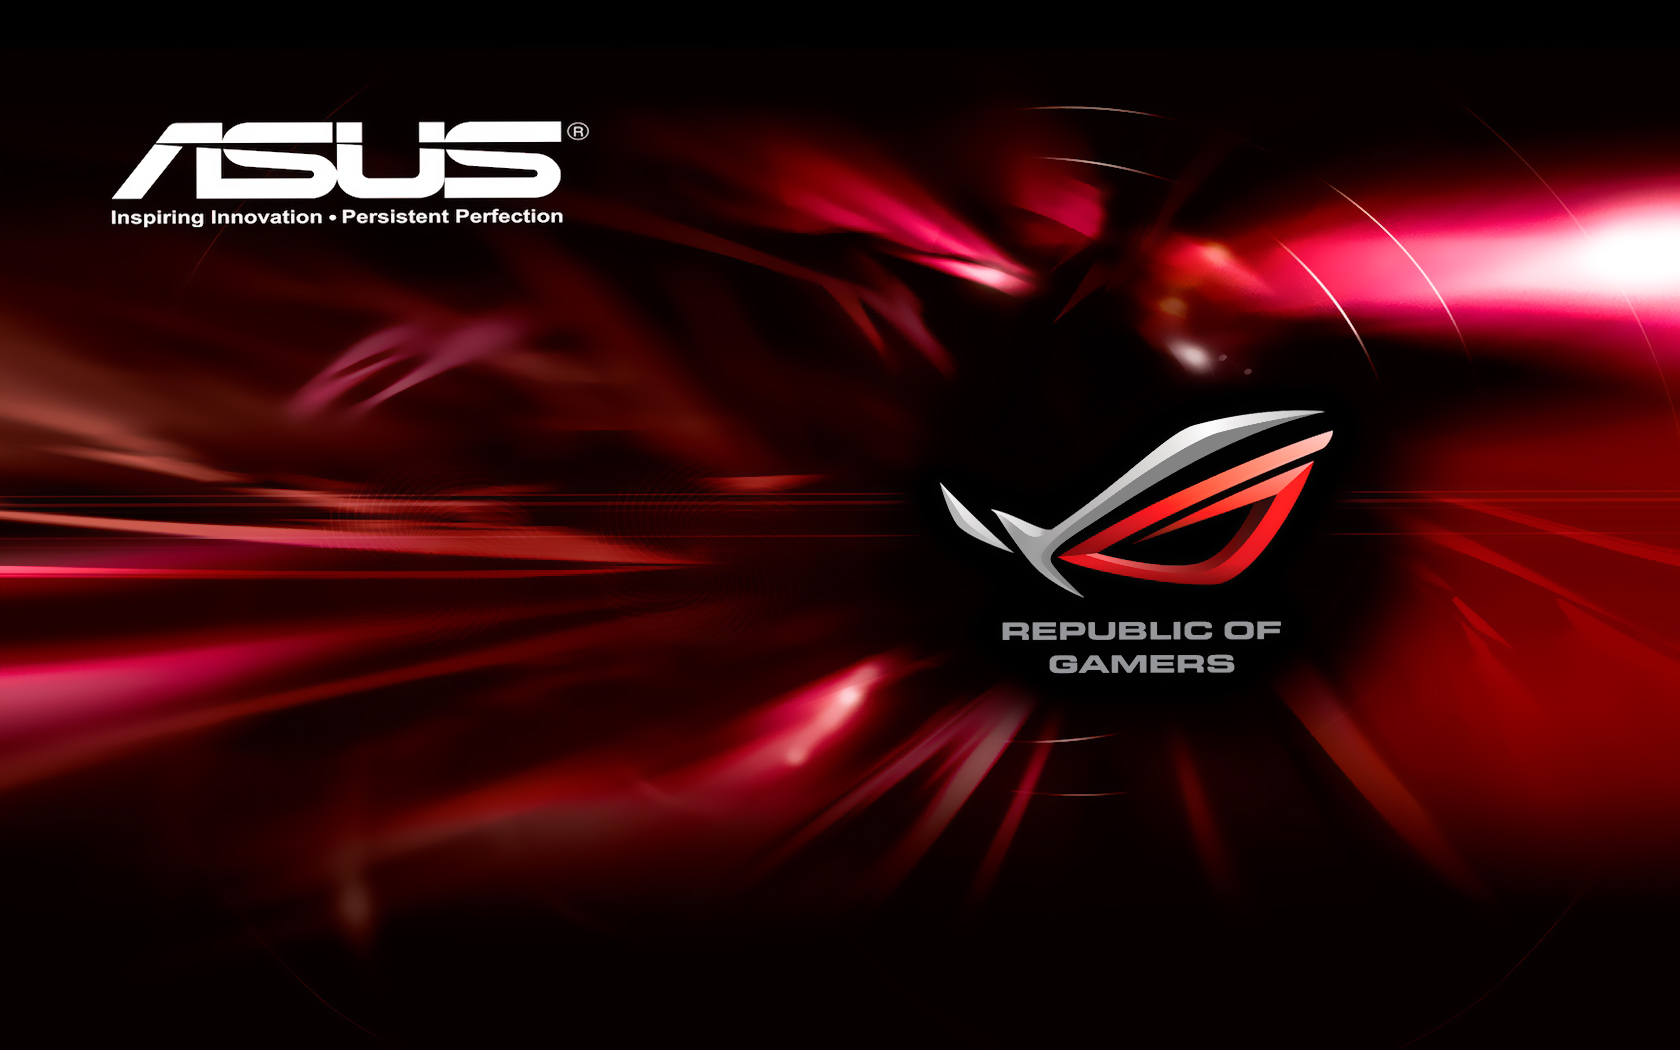 Asus Wallpapers 1 | Chainimage